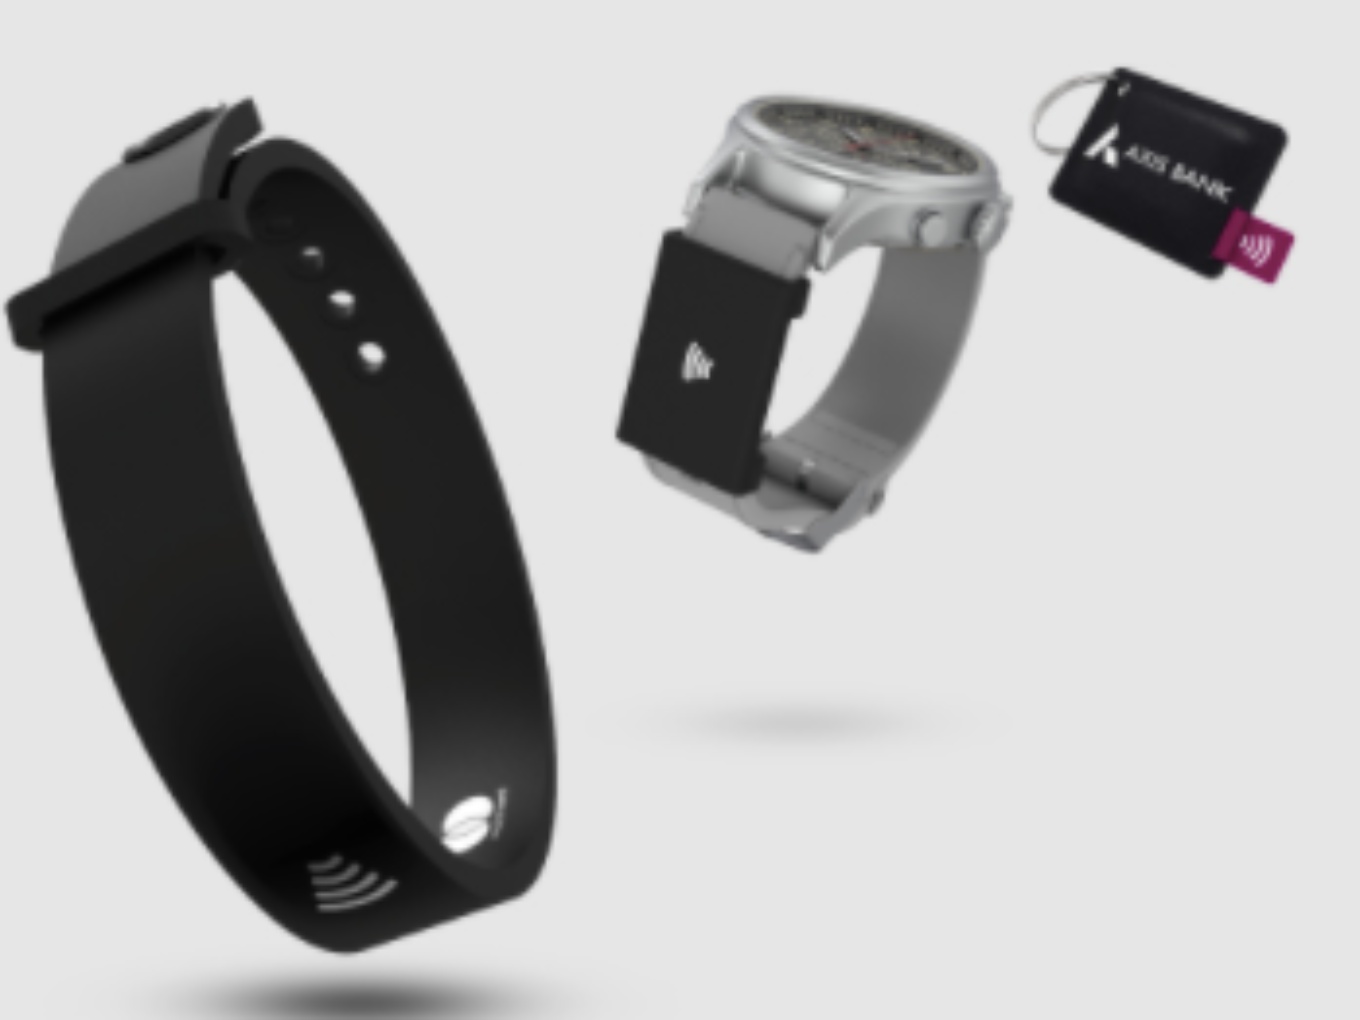 Axis Bank’s Wearable Device Shows The Contactless Future Of Retail Payments